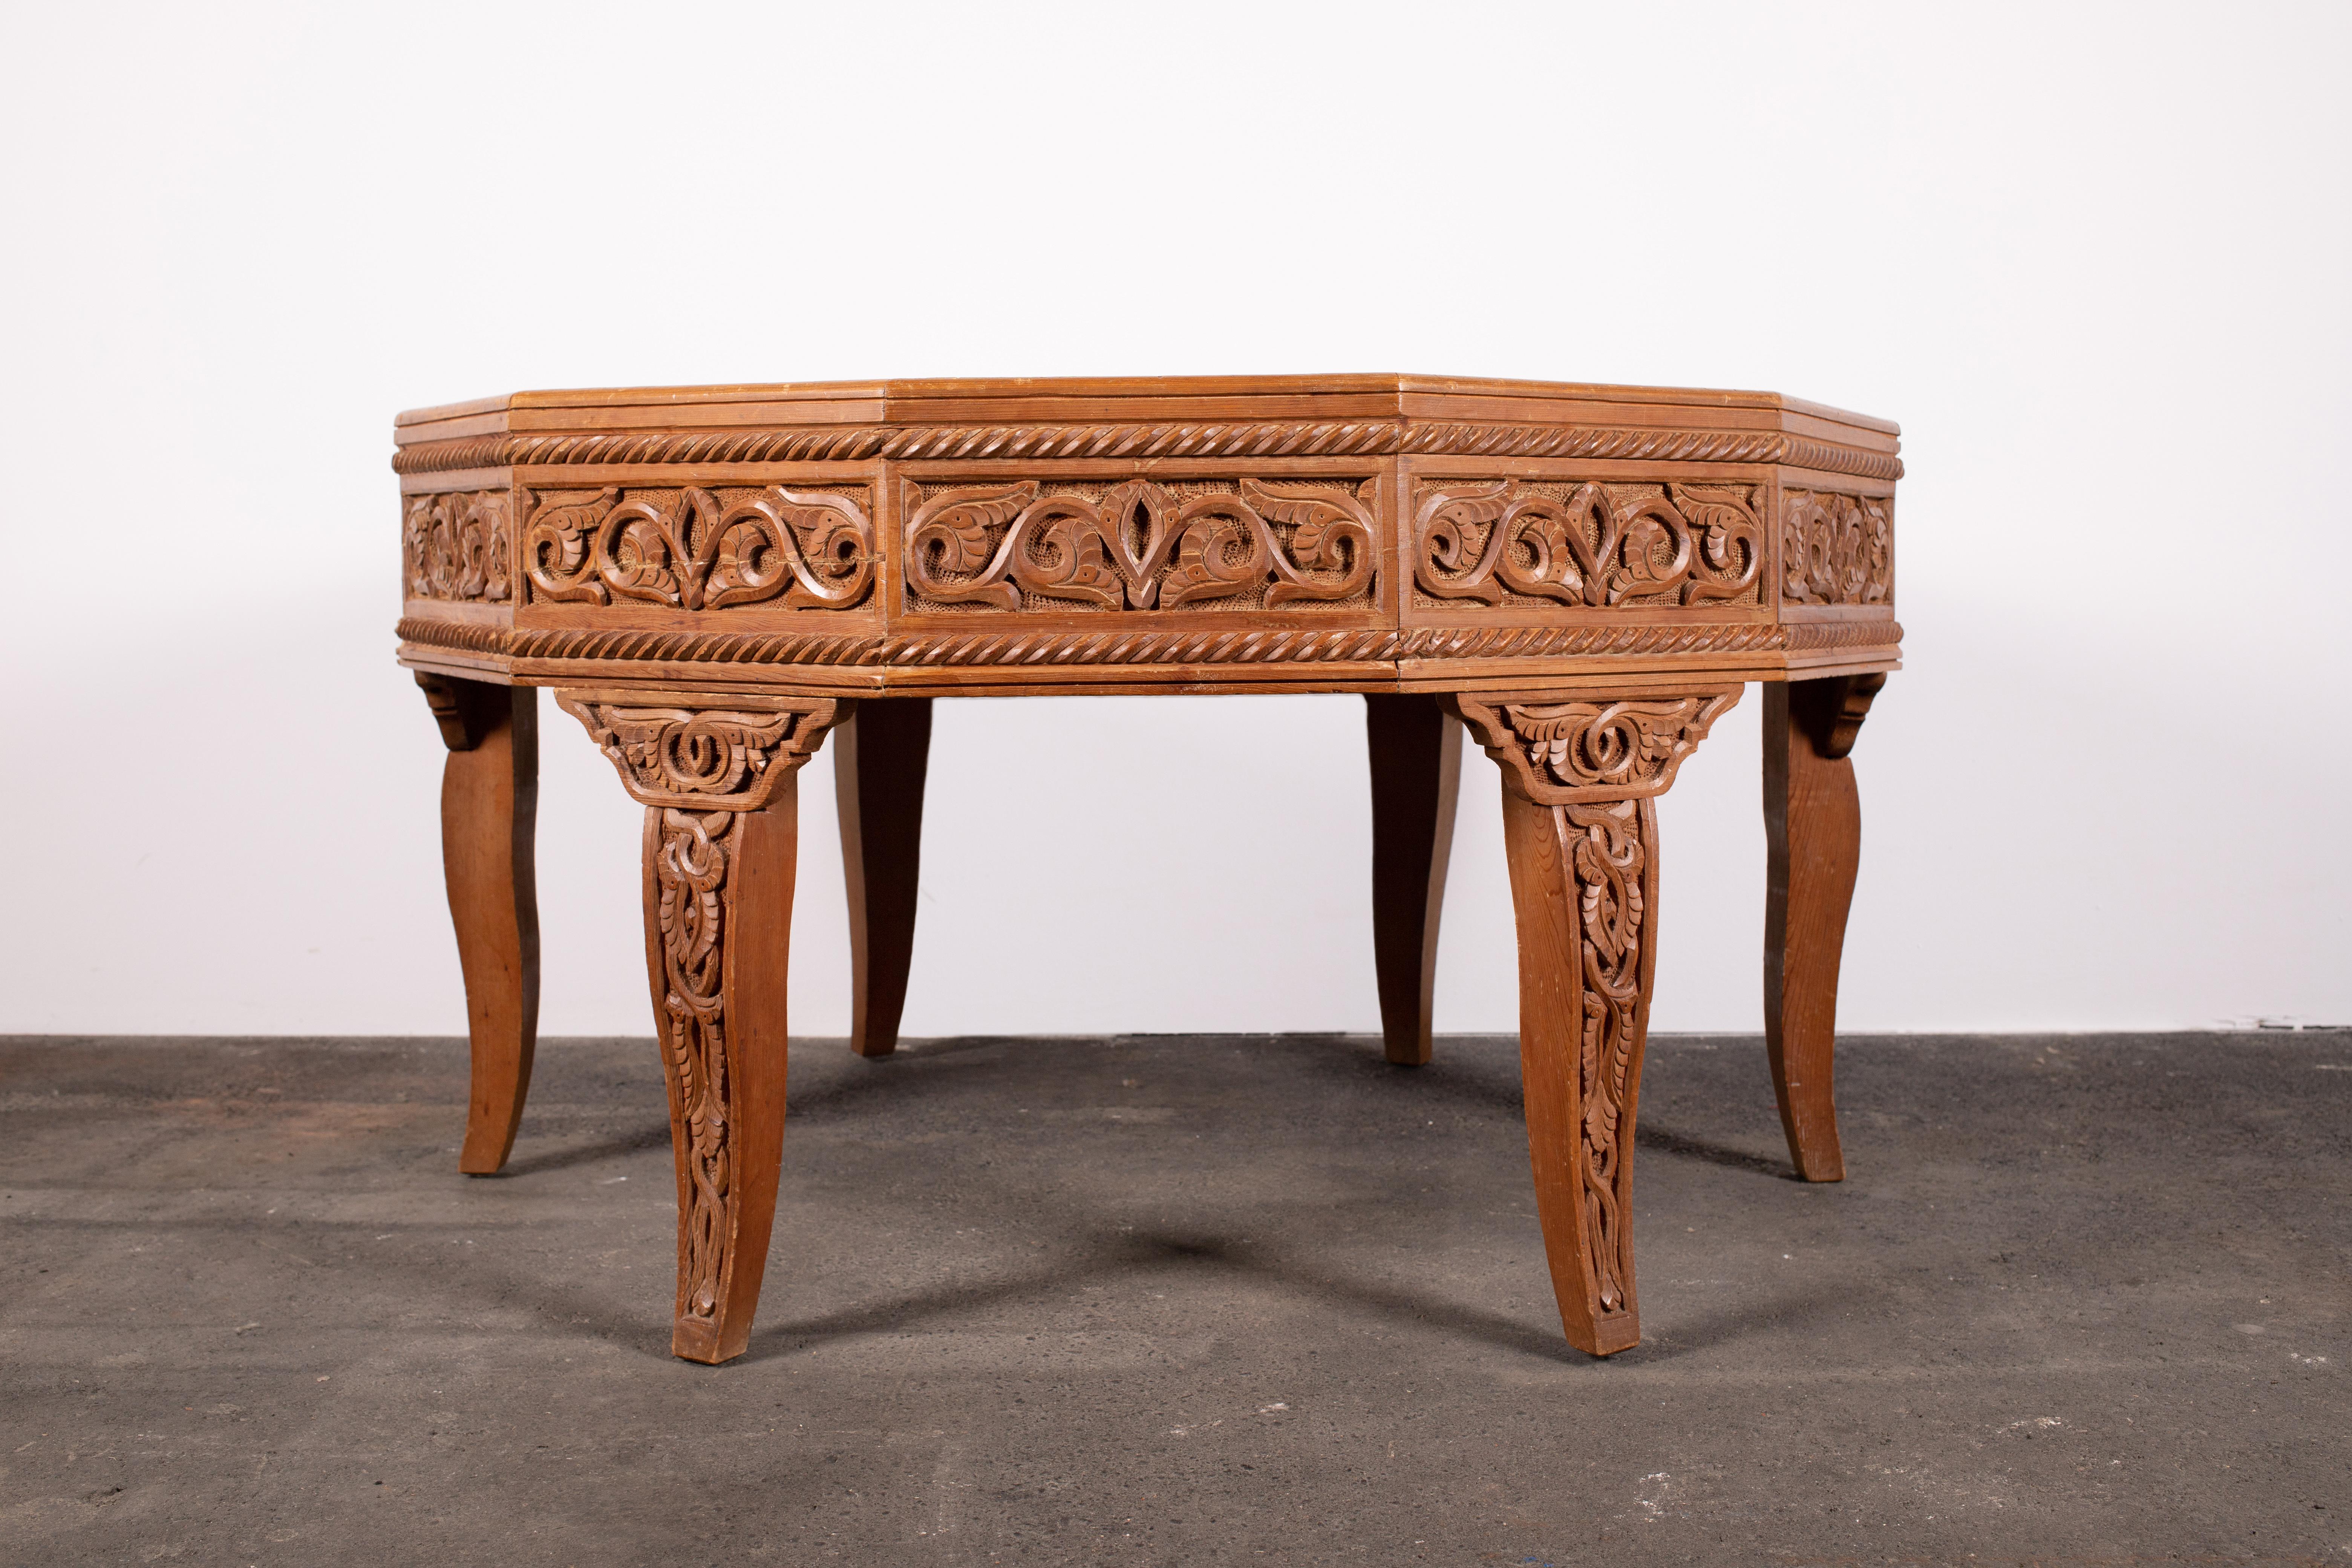 Exceptional craftsmanship and uniquely beautiful wood, both of a bygone era. This 12-sided center table or coffee table is constructed of Atlas Cedar. A wood unique to pockets of the Moroccan Atlas Mountains. An ornamental wood, highly prized for